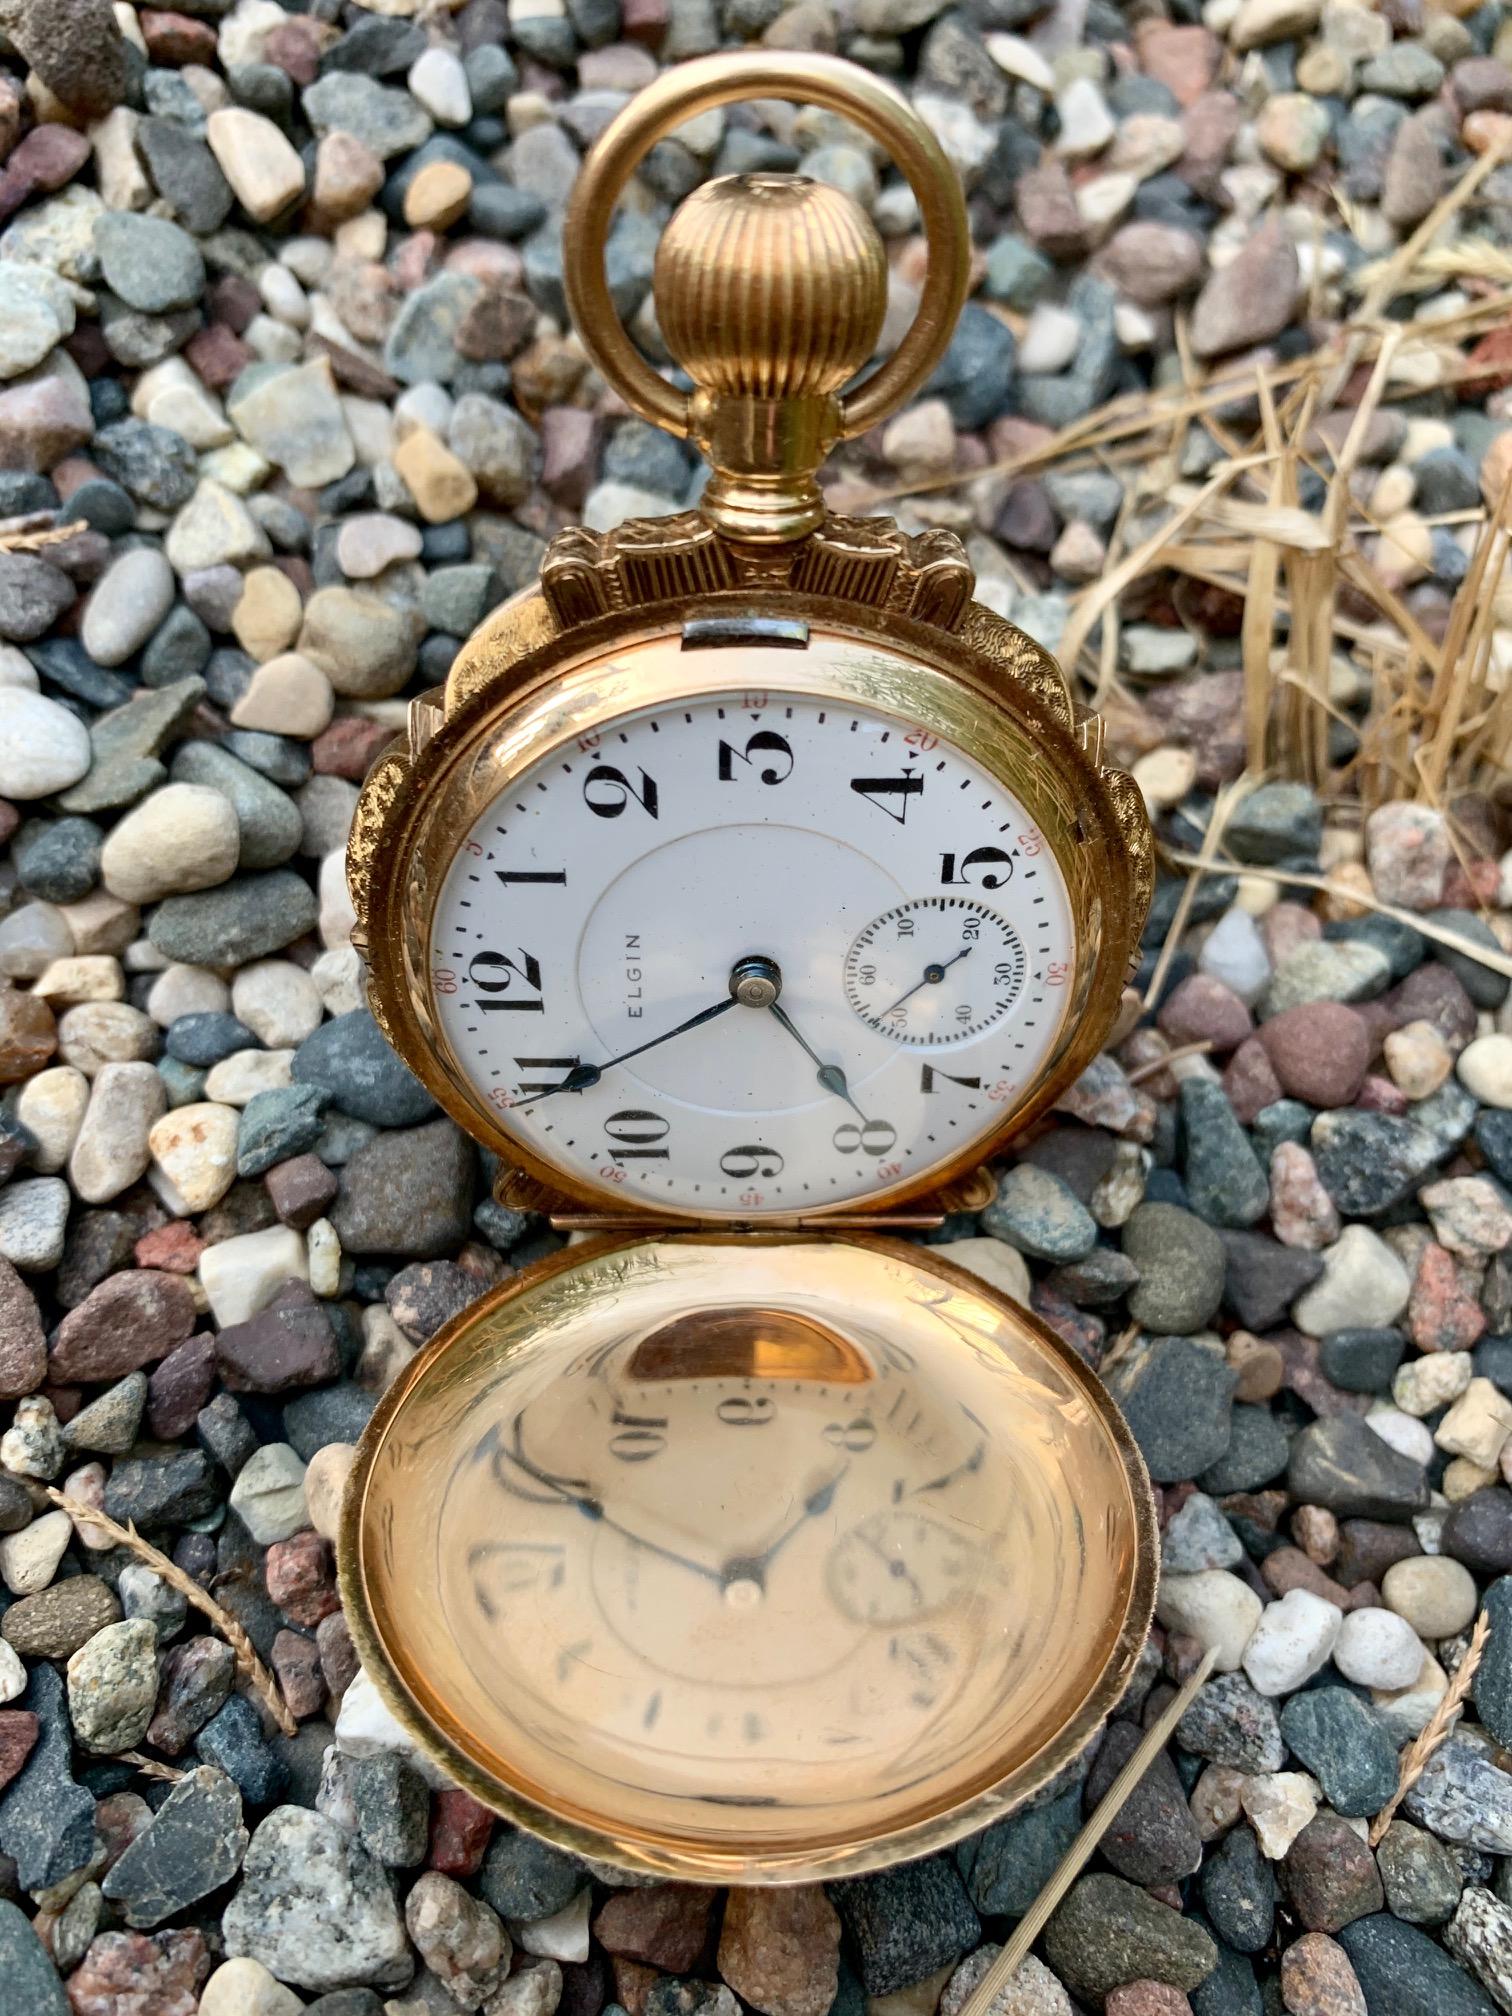 this pocket watch is absolutely amazing!!!  This piece is from the owner's personal collection and is certainly one of our shop's favorites.

This piece is made by Elgin. It is a 21 jewel piece; movement no. 1 #348.    It is adorned with a diamond